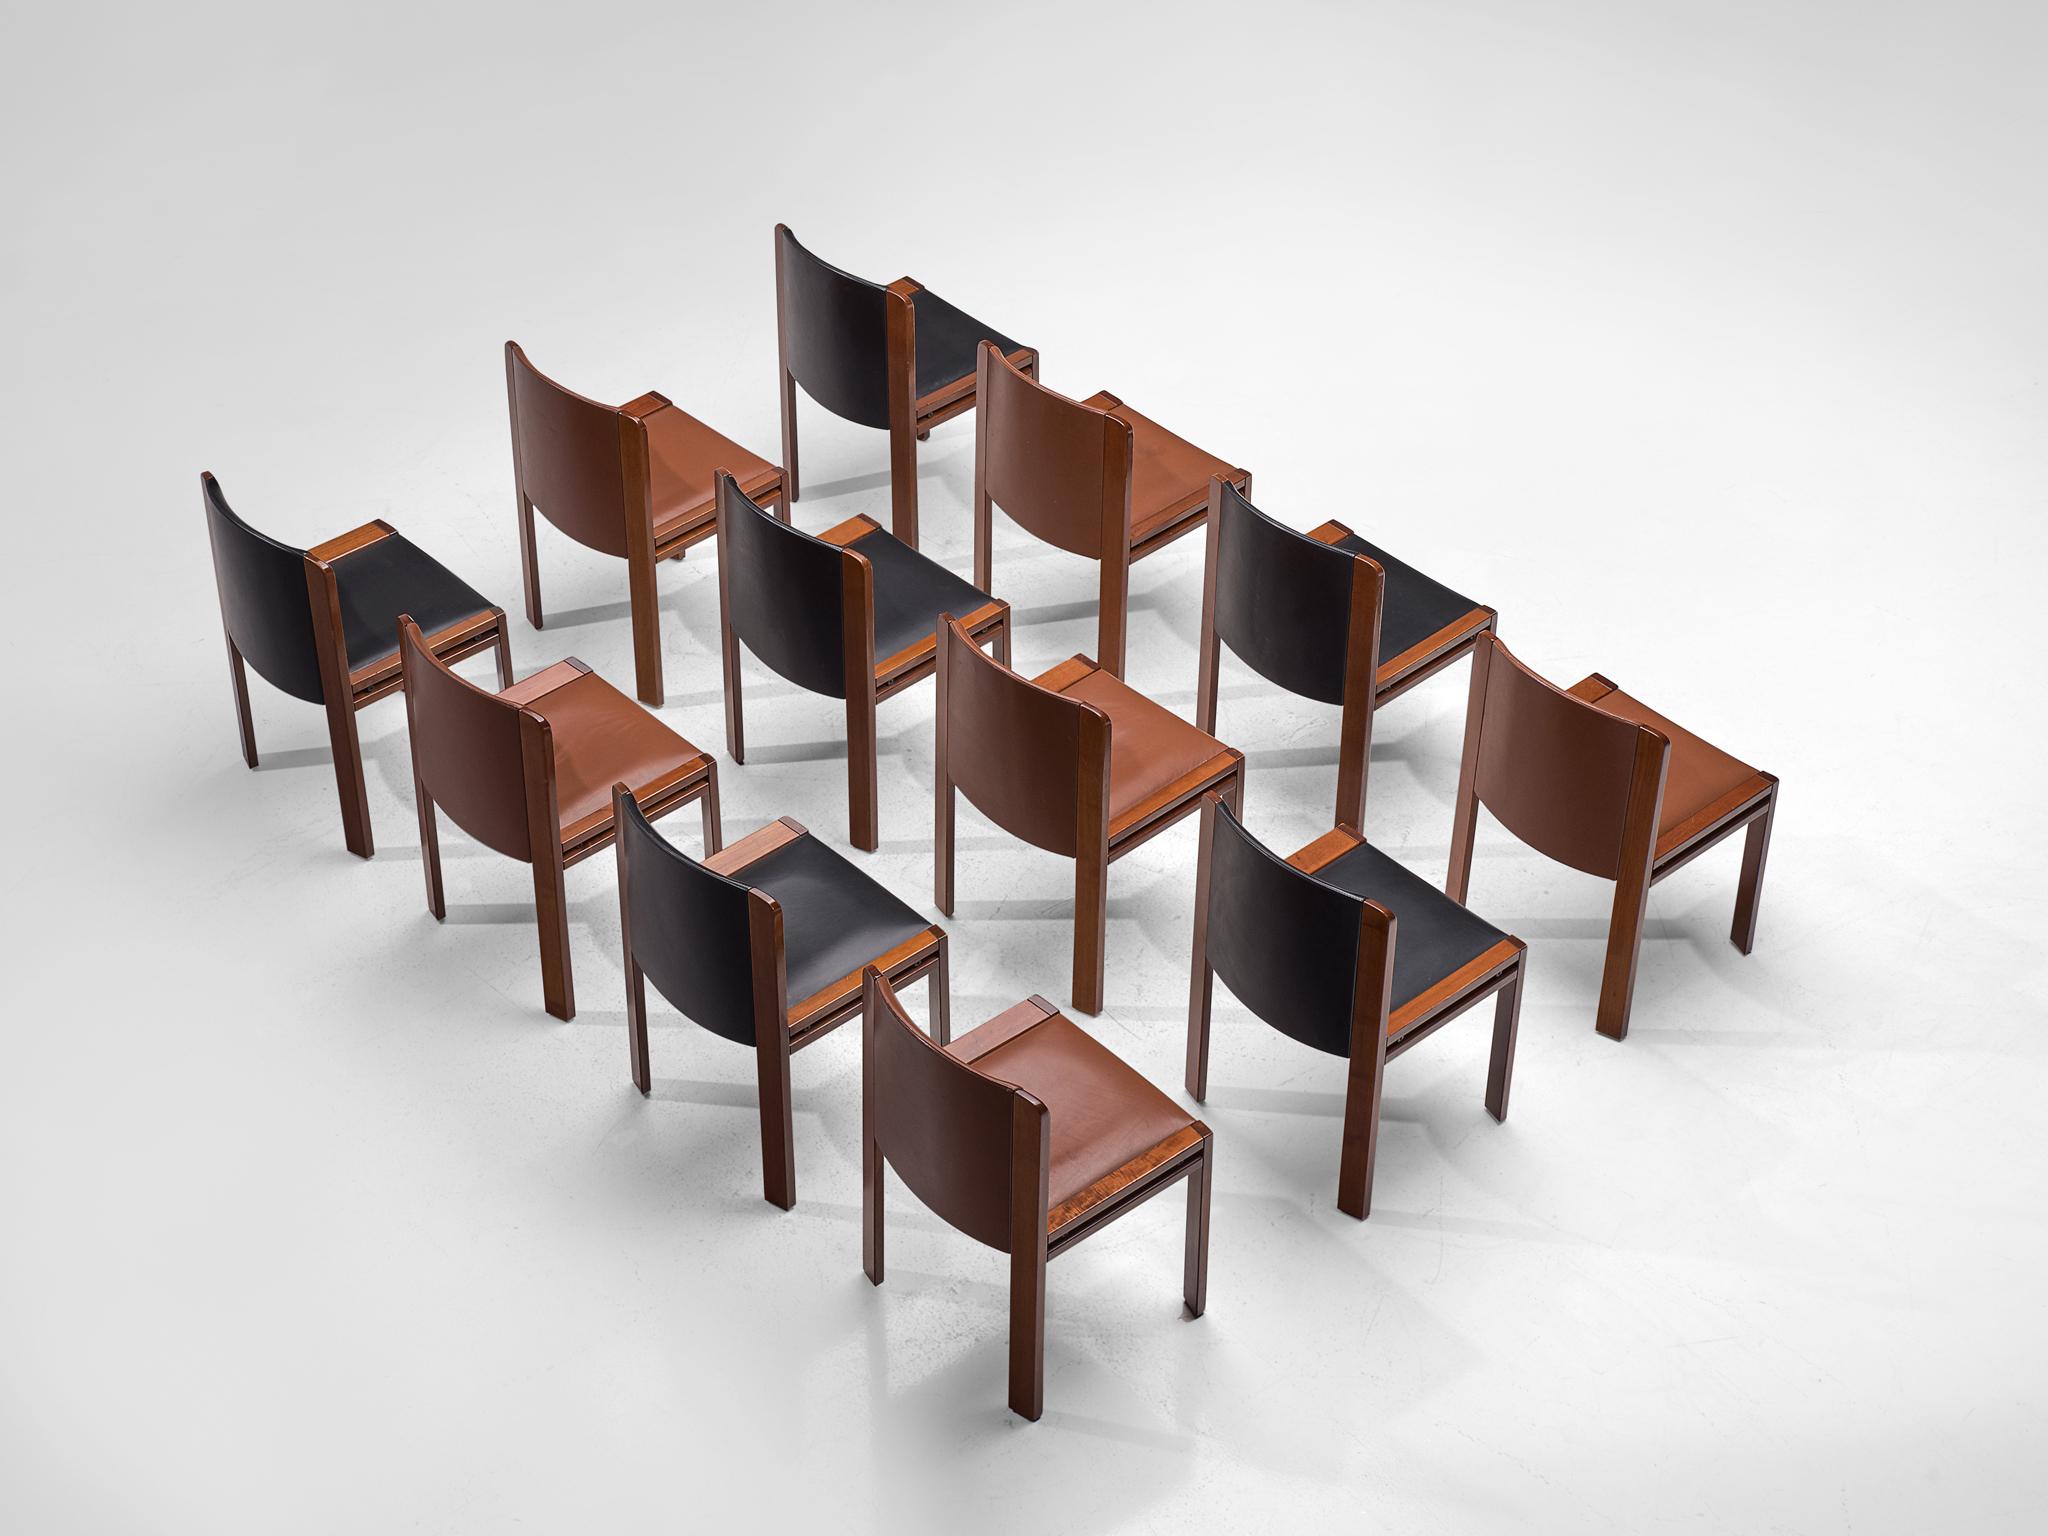 Joe Colombo for Pozzi, 12 dining chairs model '300', leather and oak, Italy, 1966.

Functionalist set of dining chairs is designed by Joe Colombo in 1966. His fascination with functionality meant he always focused on the user, which lead him to